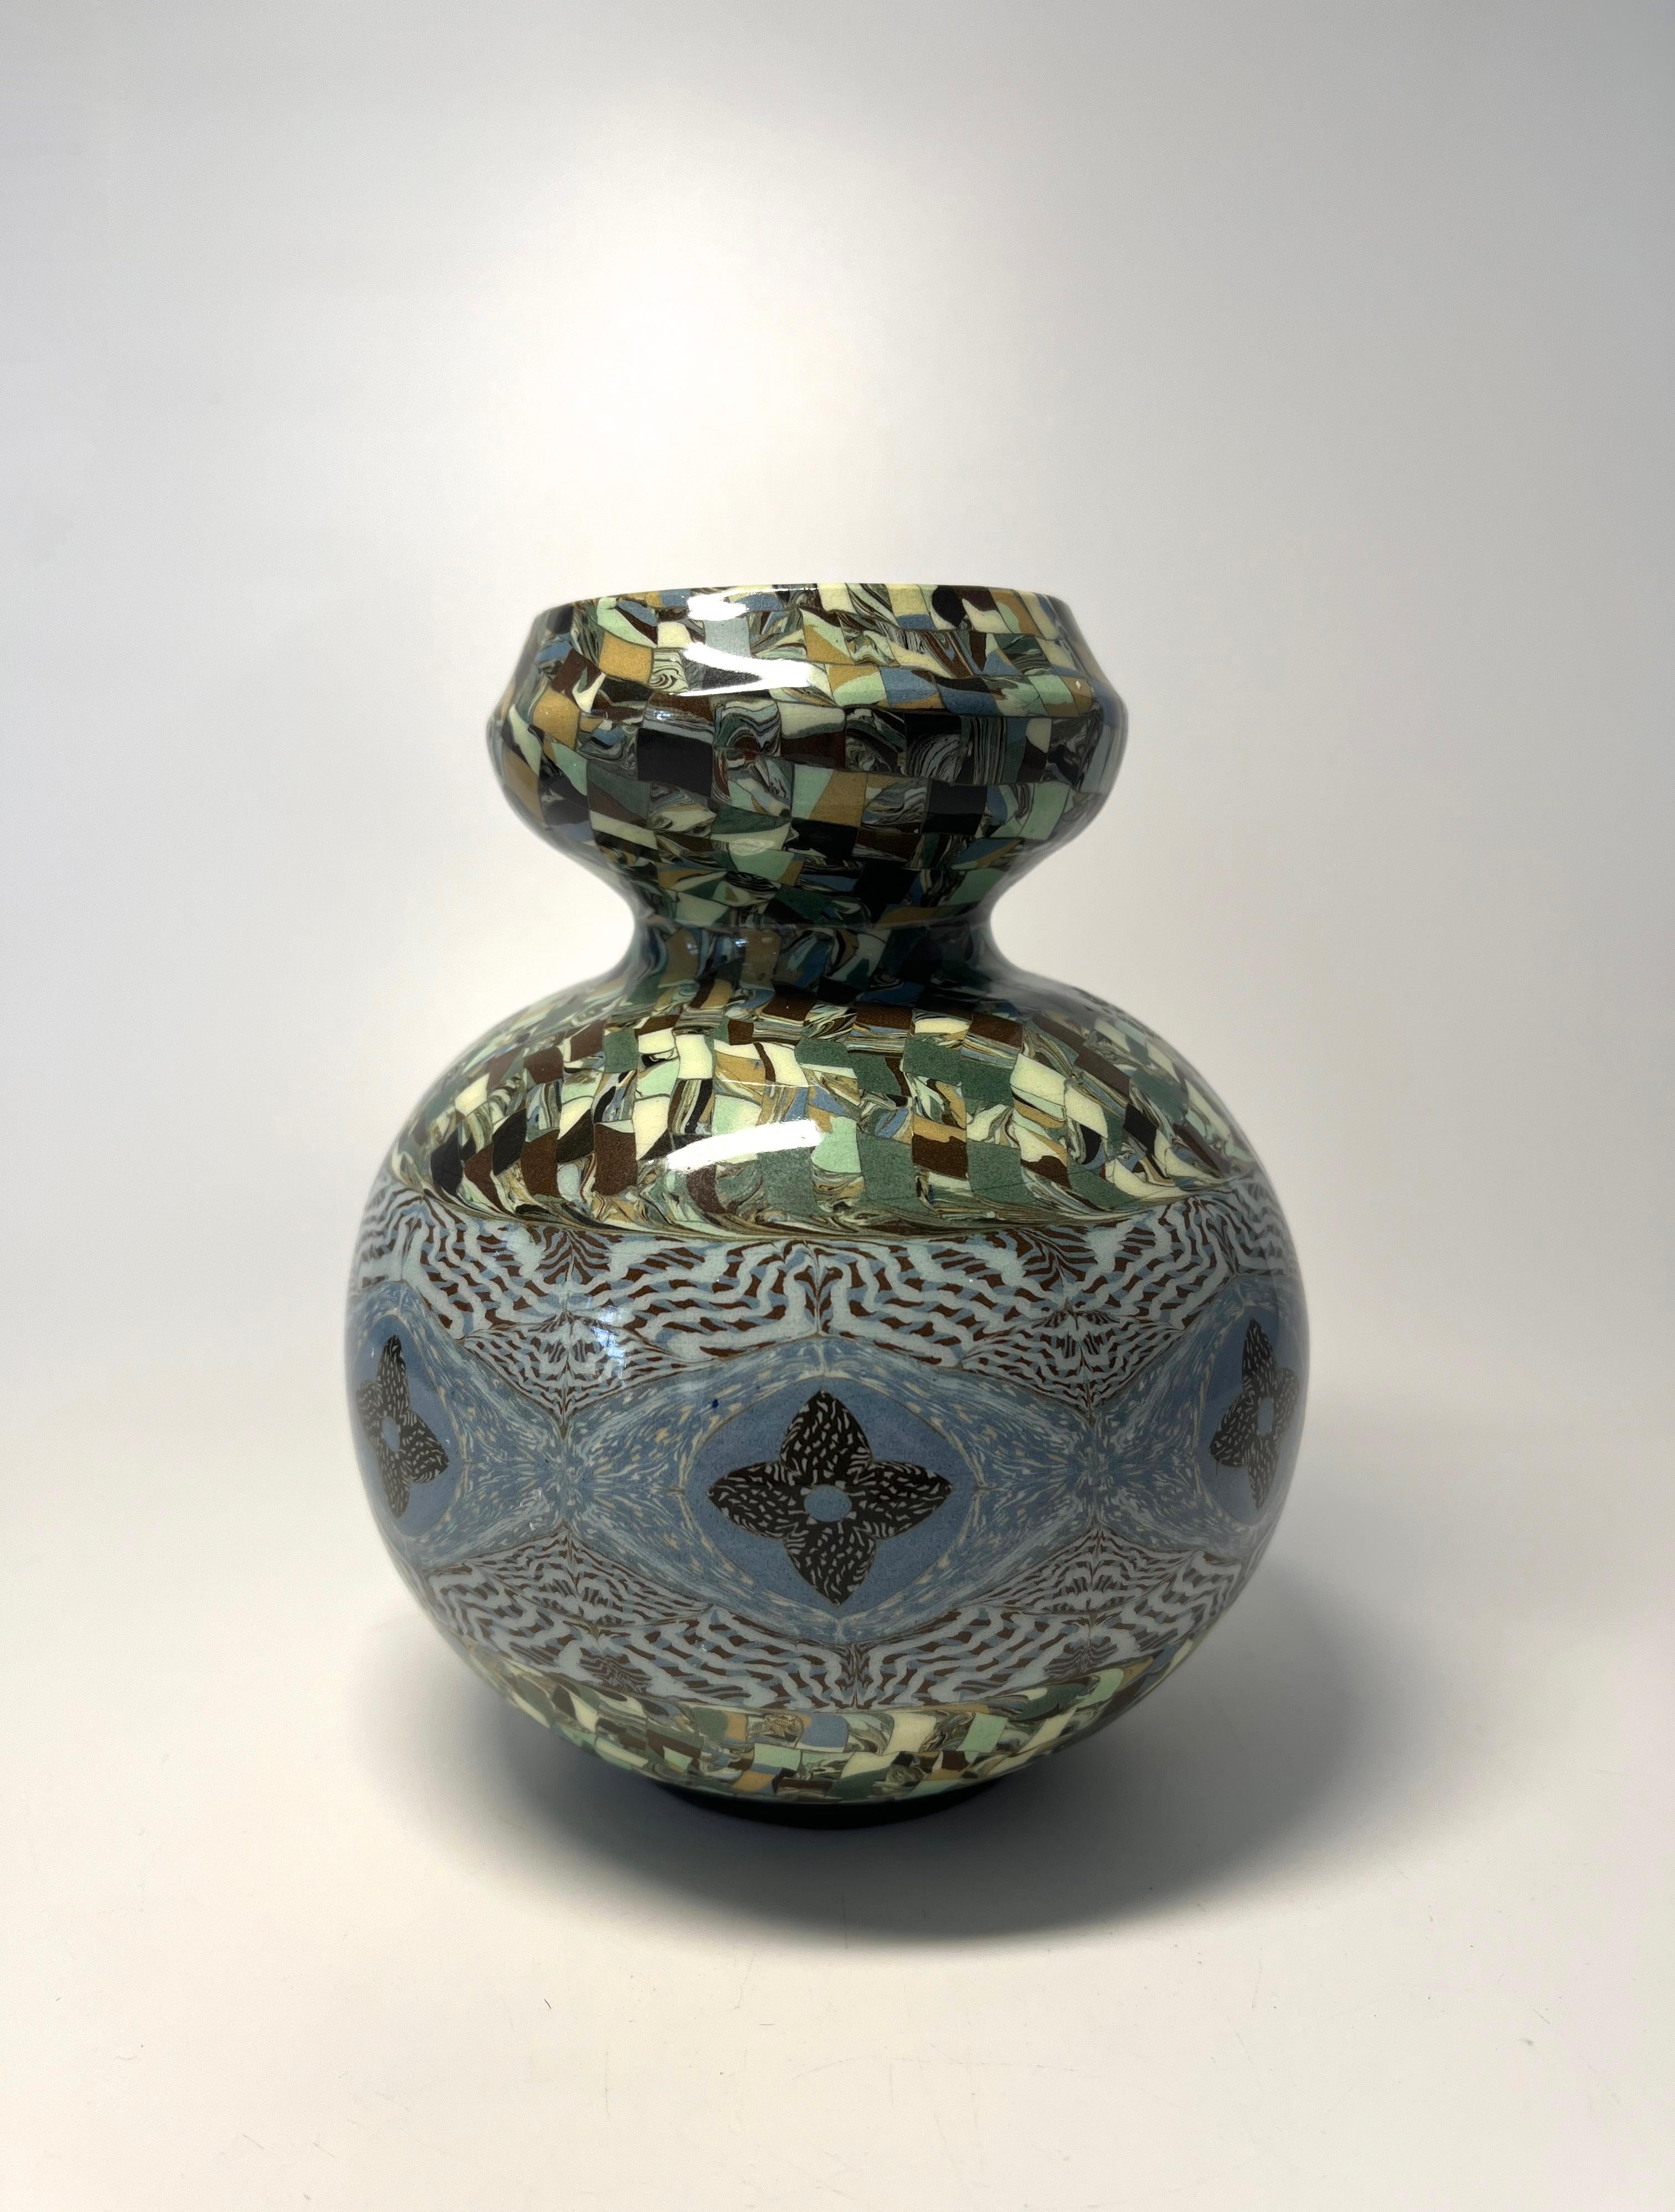 Handsomely shaped Gerbino for Vallauris, France, ceramic glazed mosaic vase in tones of blue and green
Exquisitely created by the master ceramicist Jean Gerbino
Circa 1960's
Signed Gerbino  to base
Height 6 inch, Diameter 4.75 inch, 
In excellent